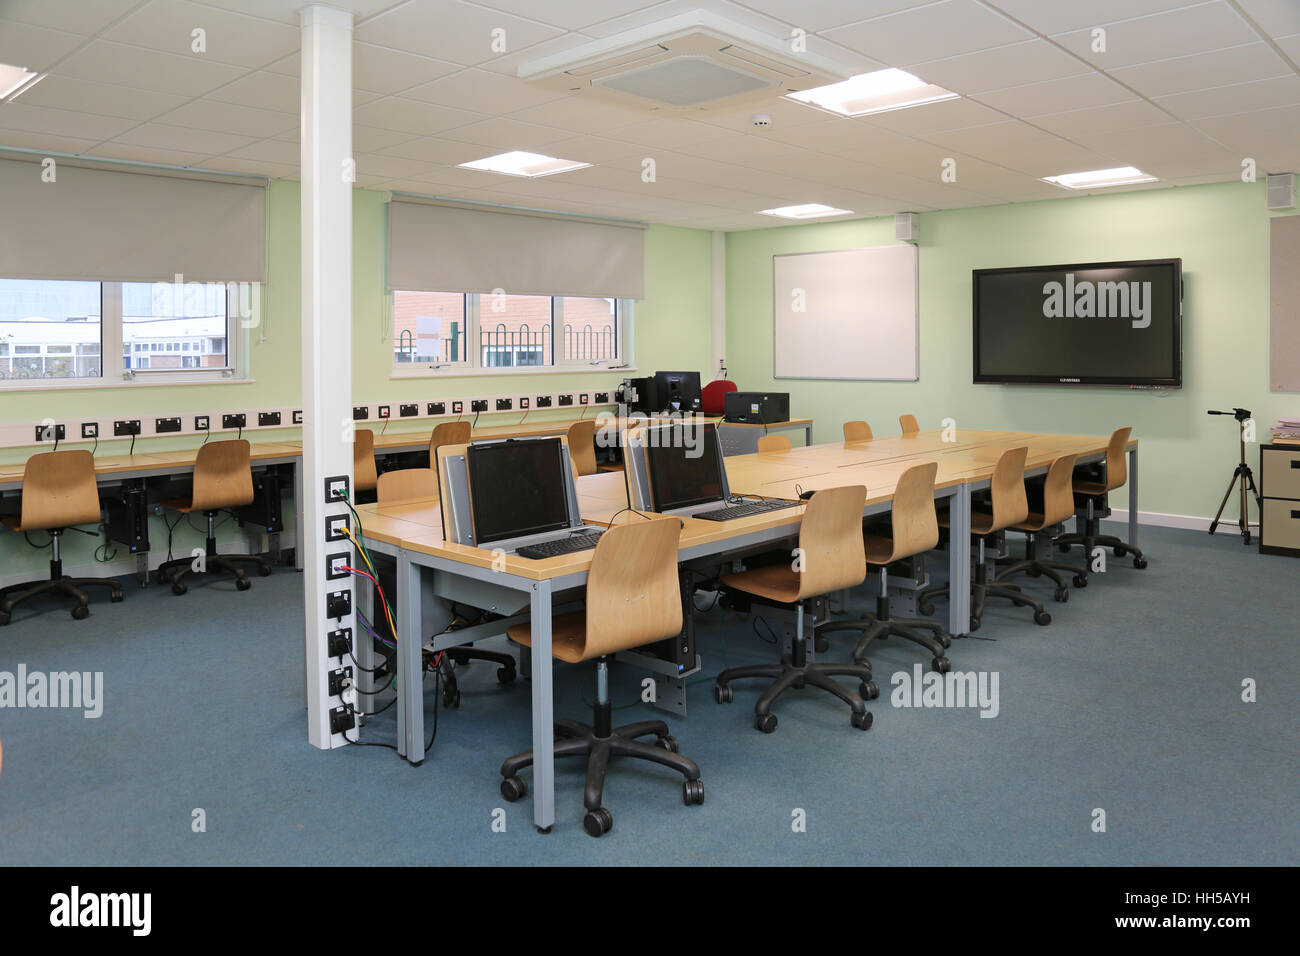 Computer desks in a new secondary school technology classroom. Shows computers concealed in special folding desks Stock Photo